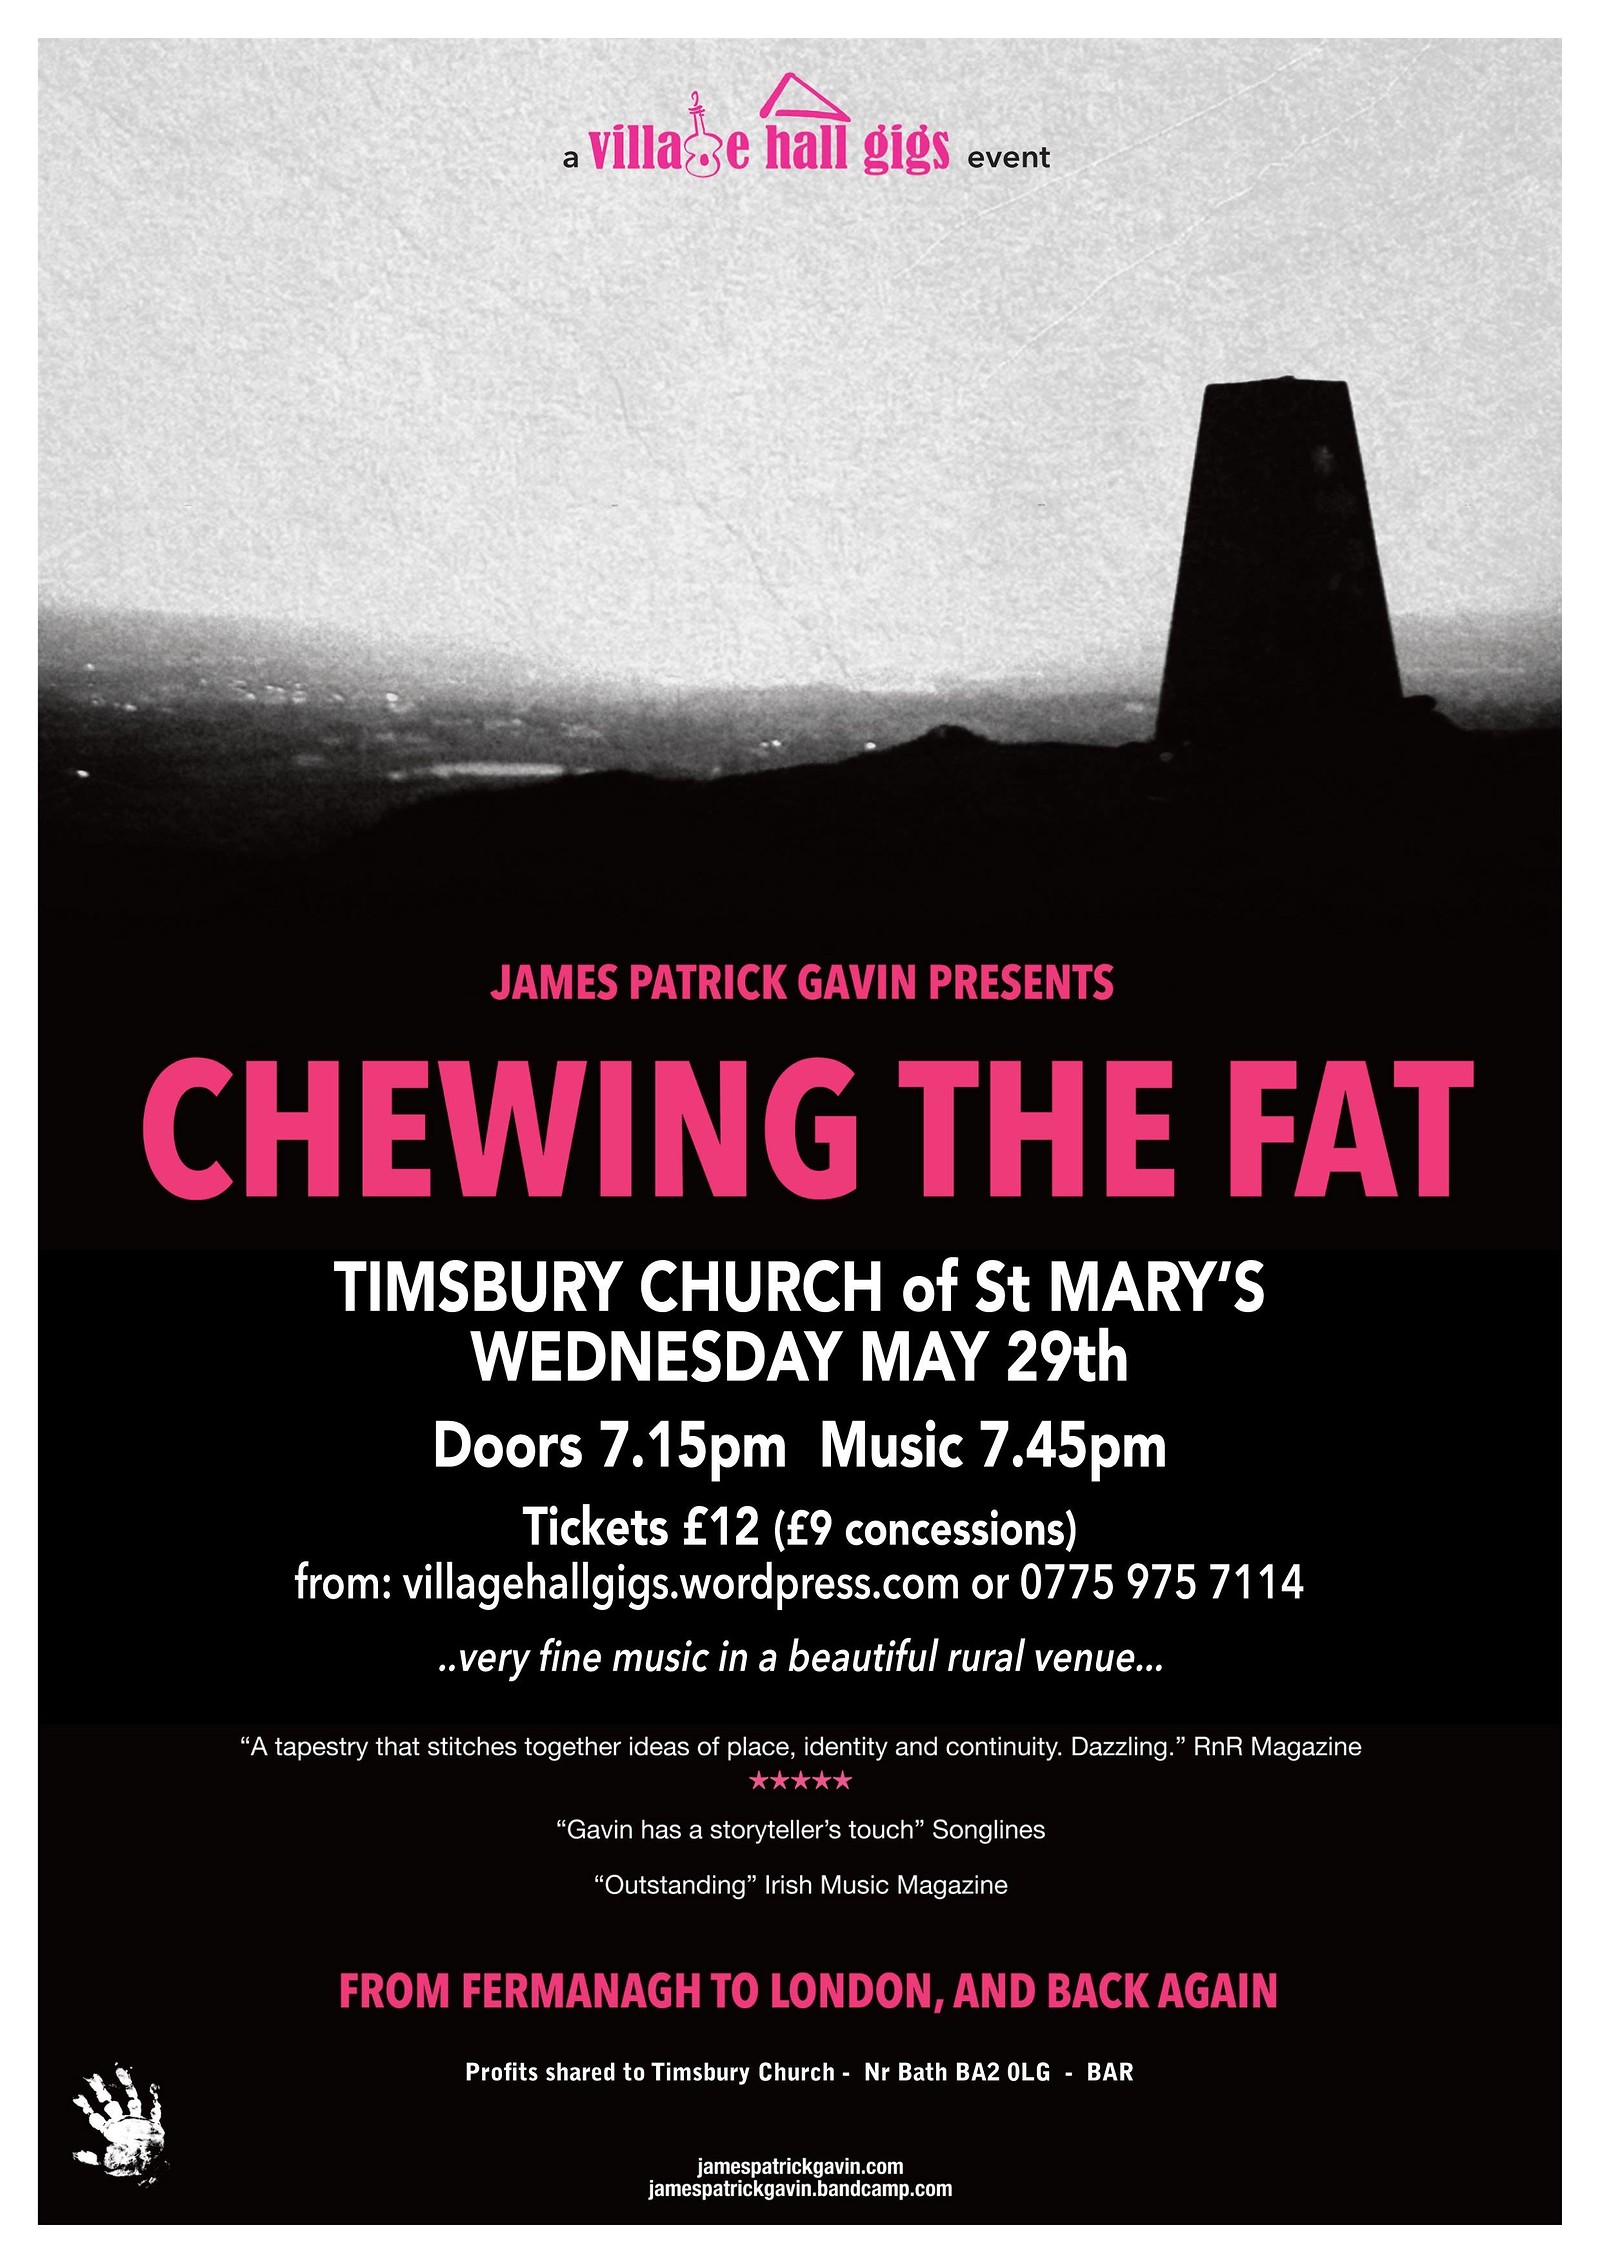 Chewing The Fat Tour 2019 at St Mary's Church